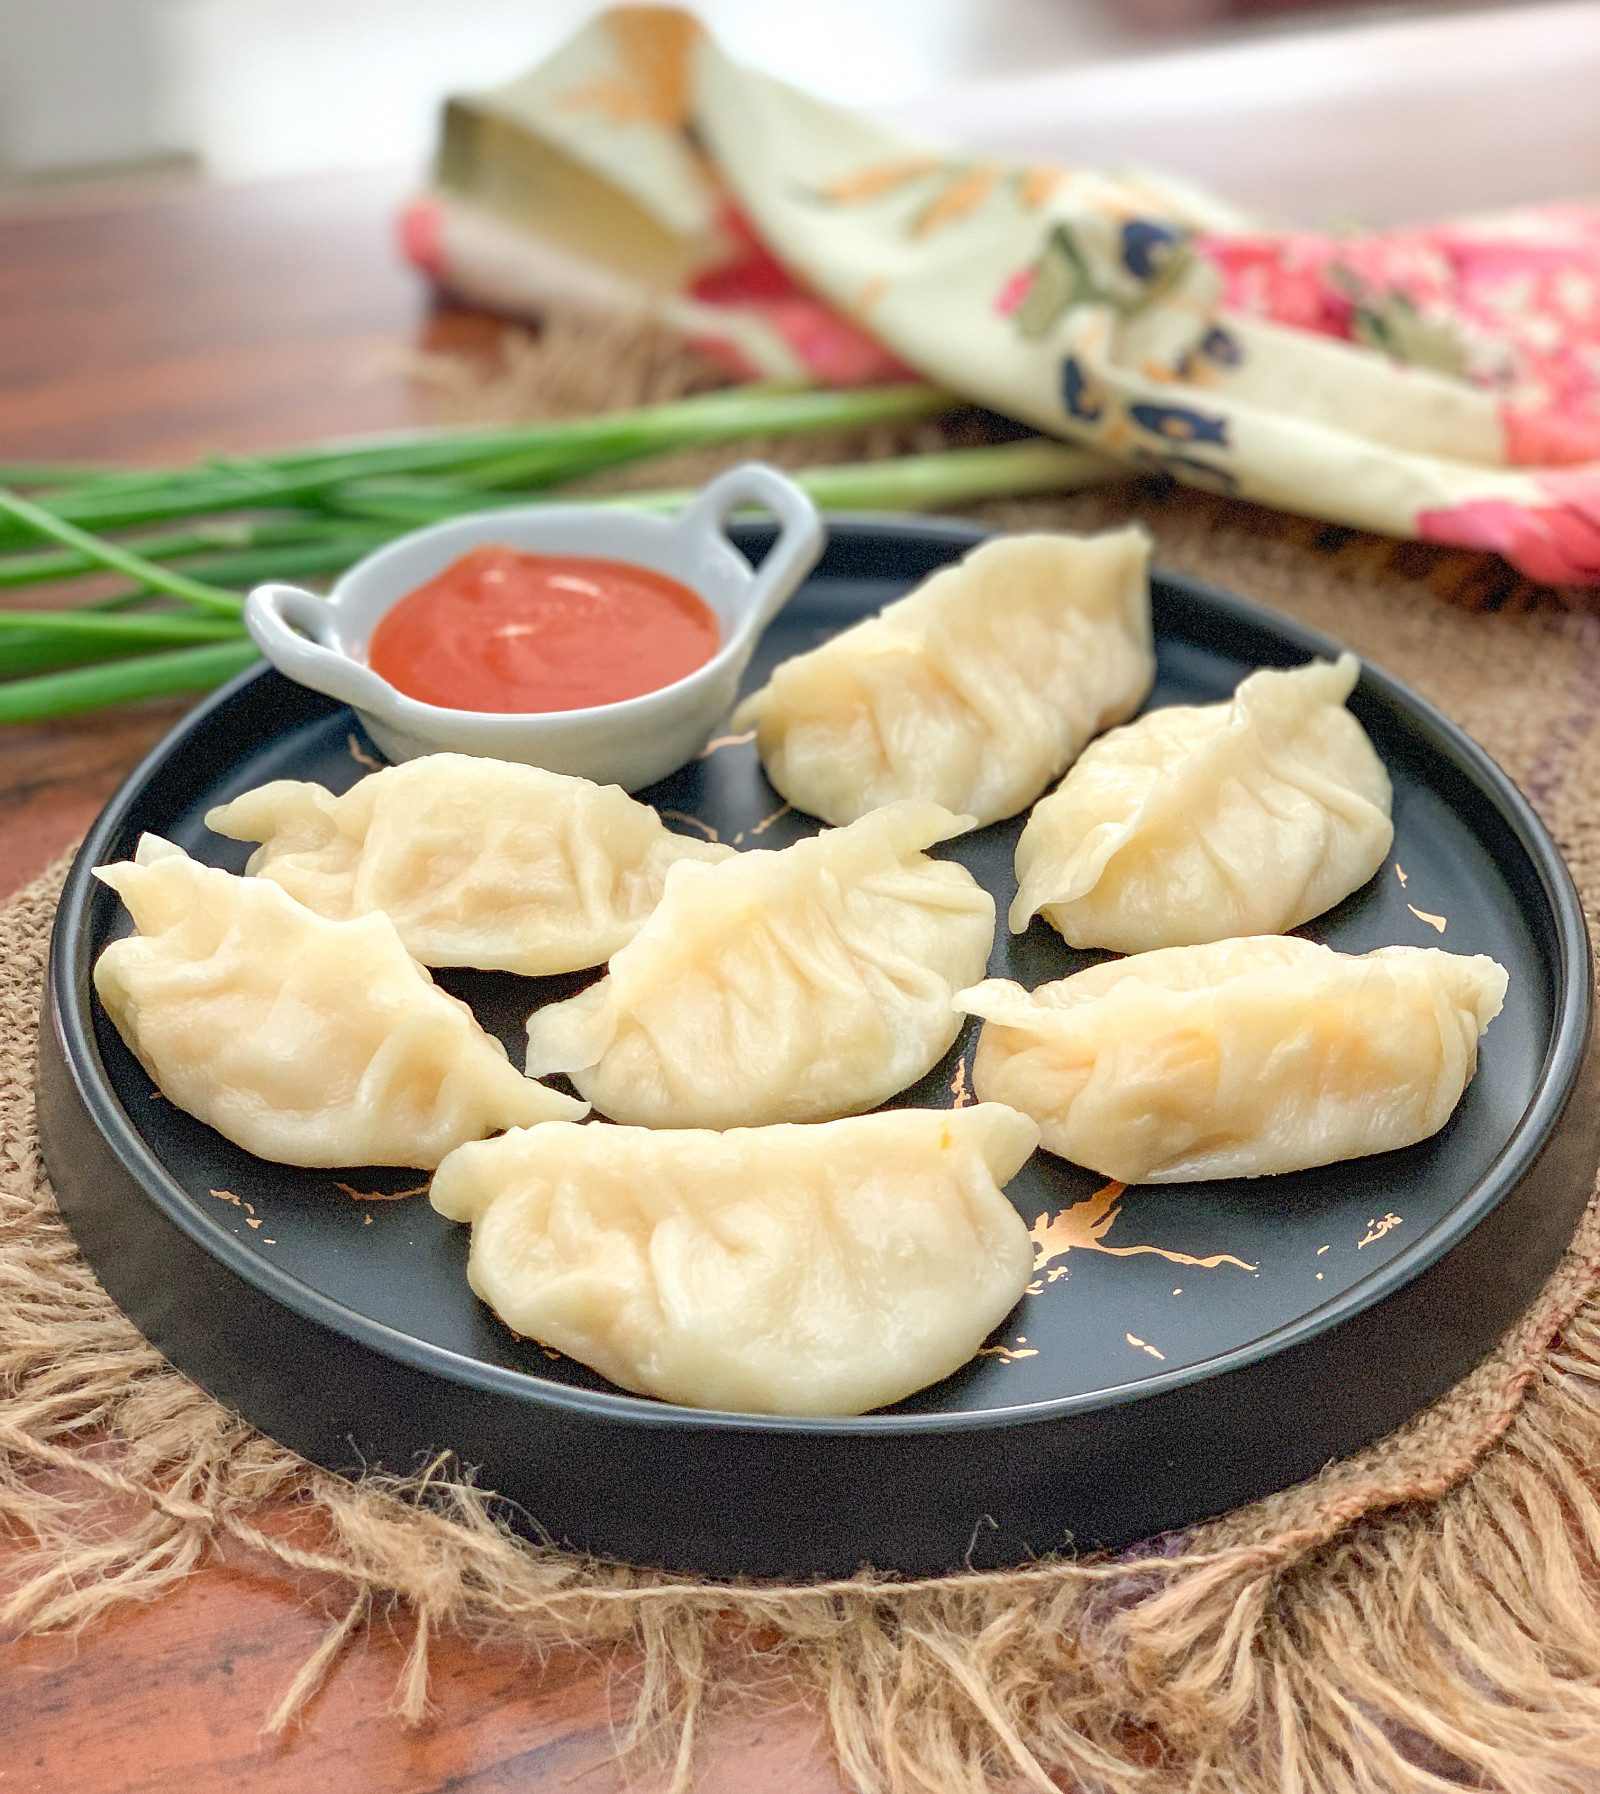 Vegetarian Momo Recipe-Steamed Dumplings/A Street Food from the North East India